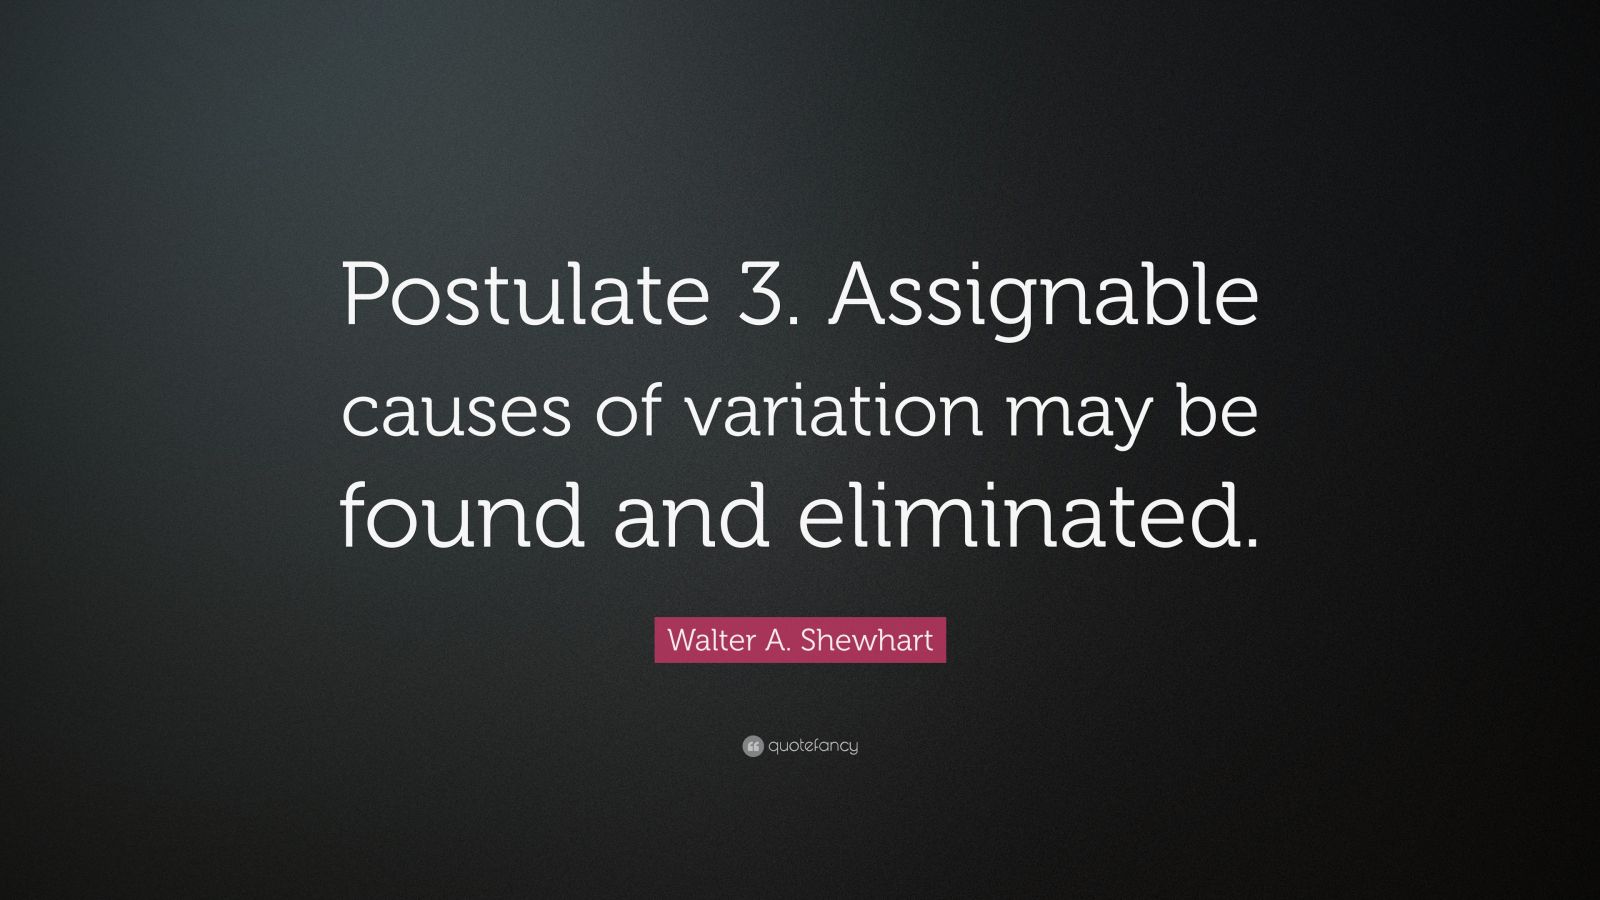 assignable variation may be due to